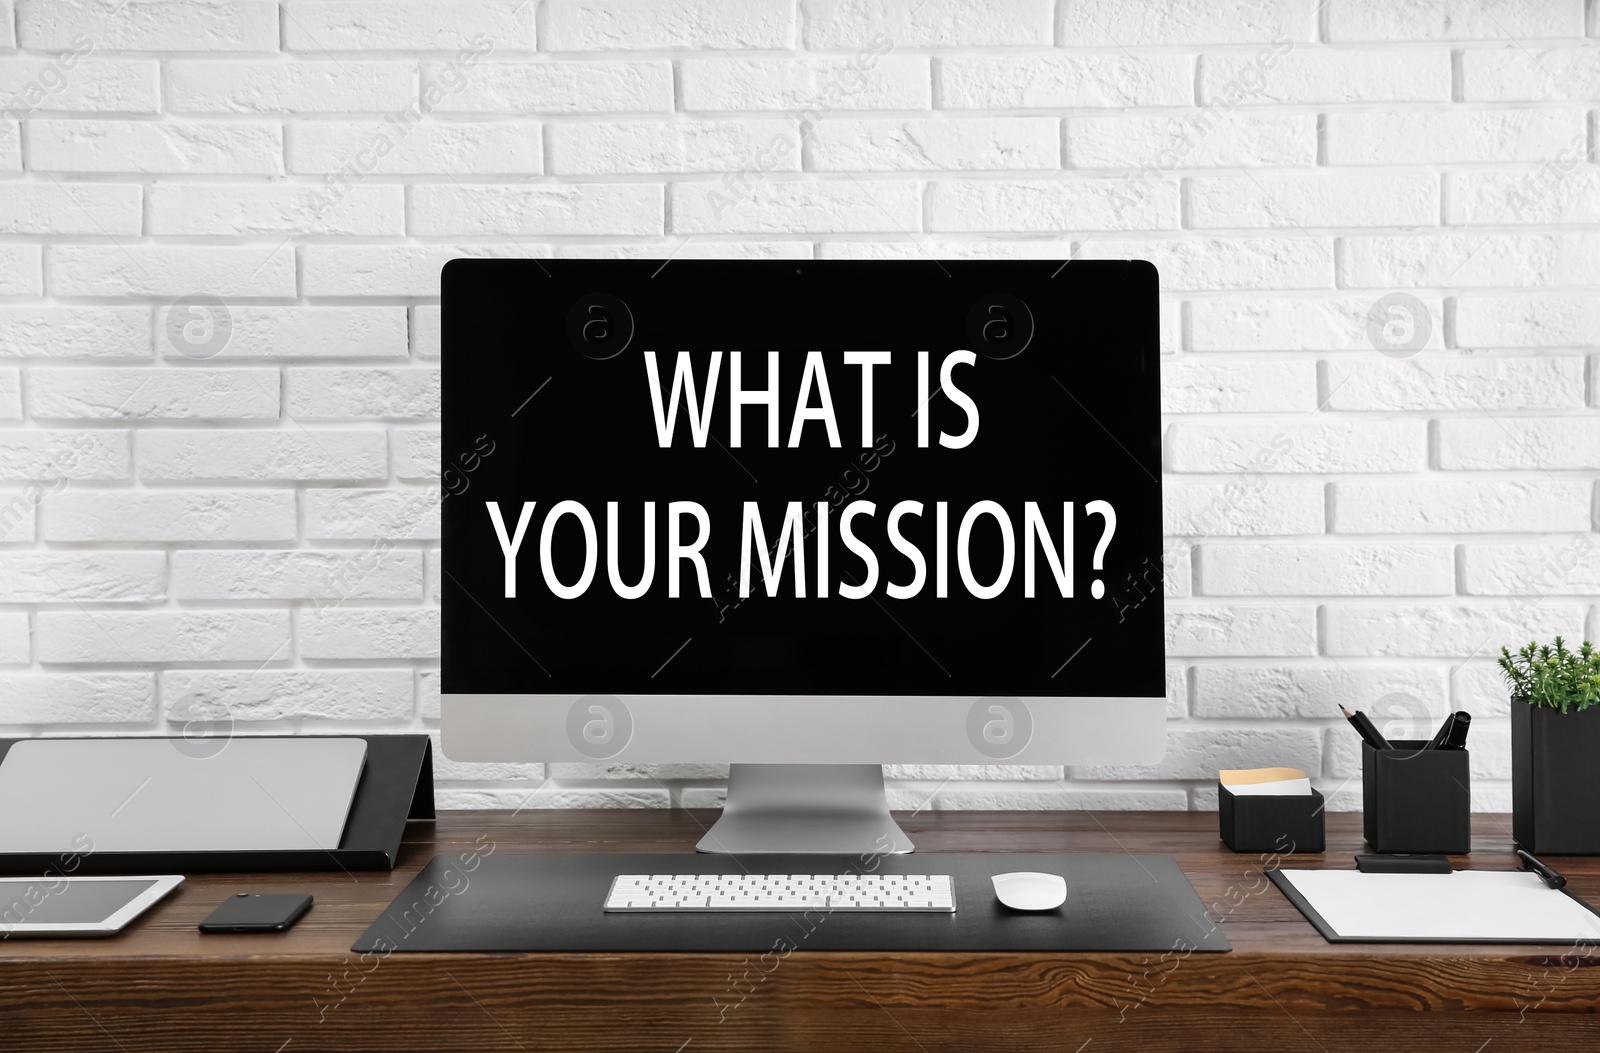 Image of Modern computer with question WHAT IS YOUR MISSION? on screen indoors 